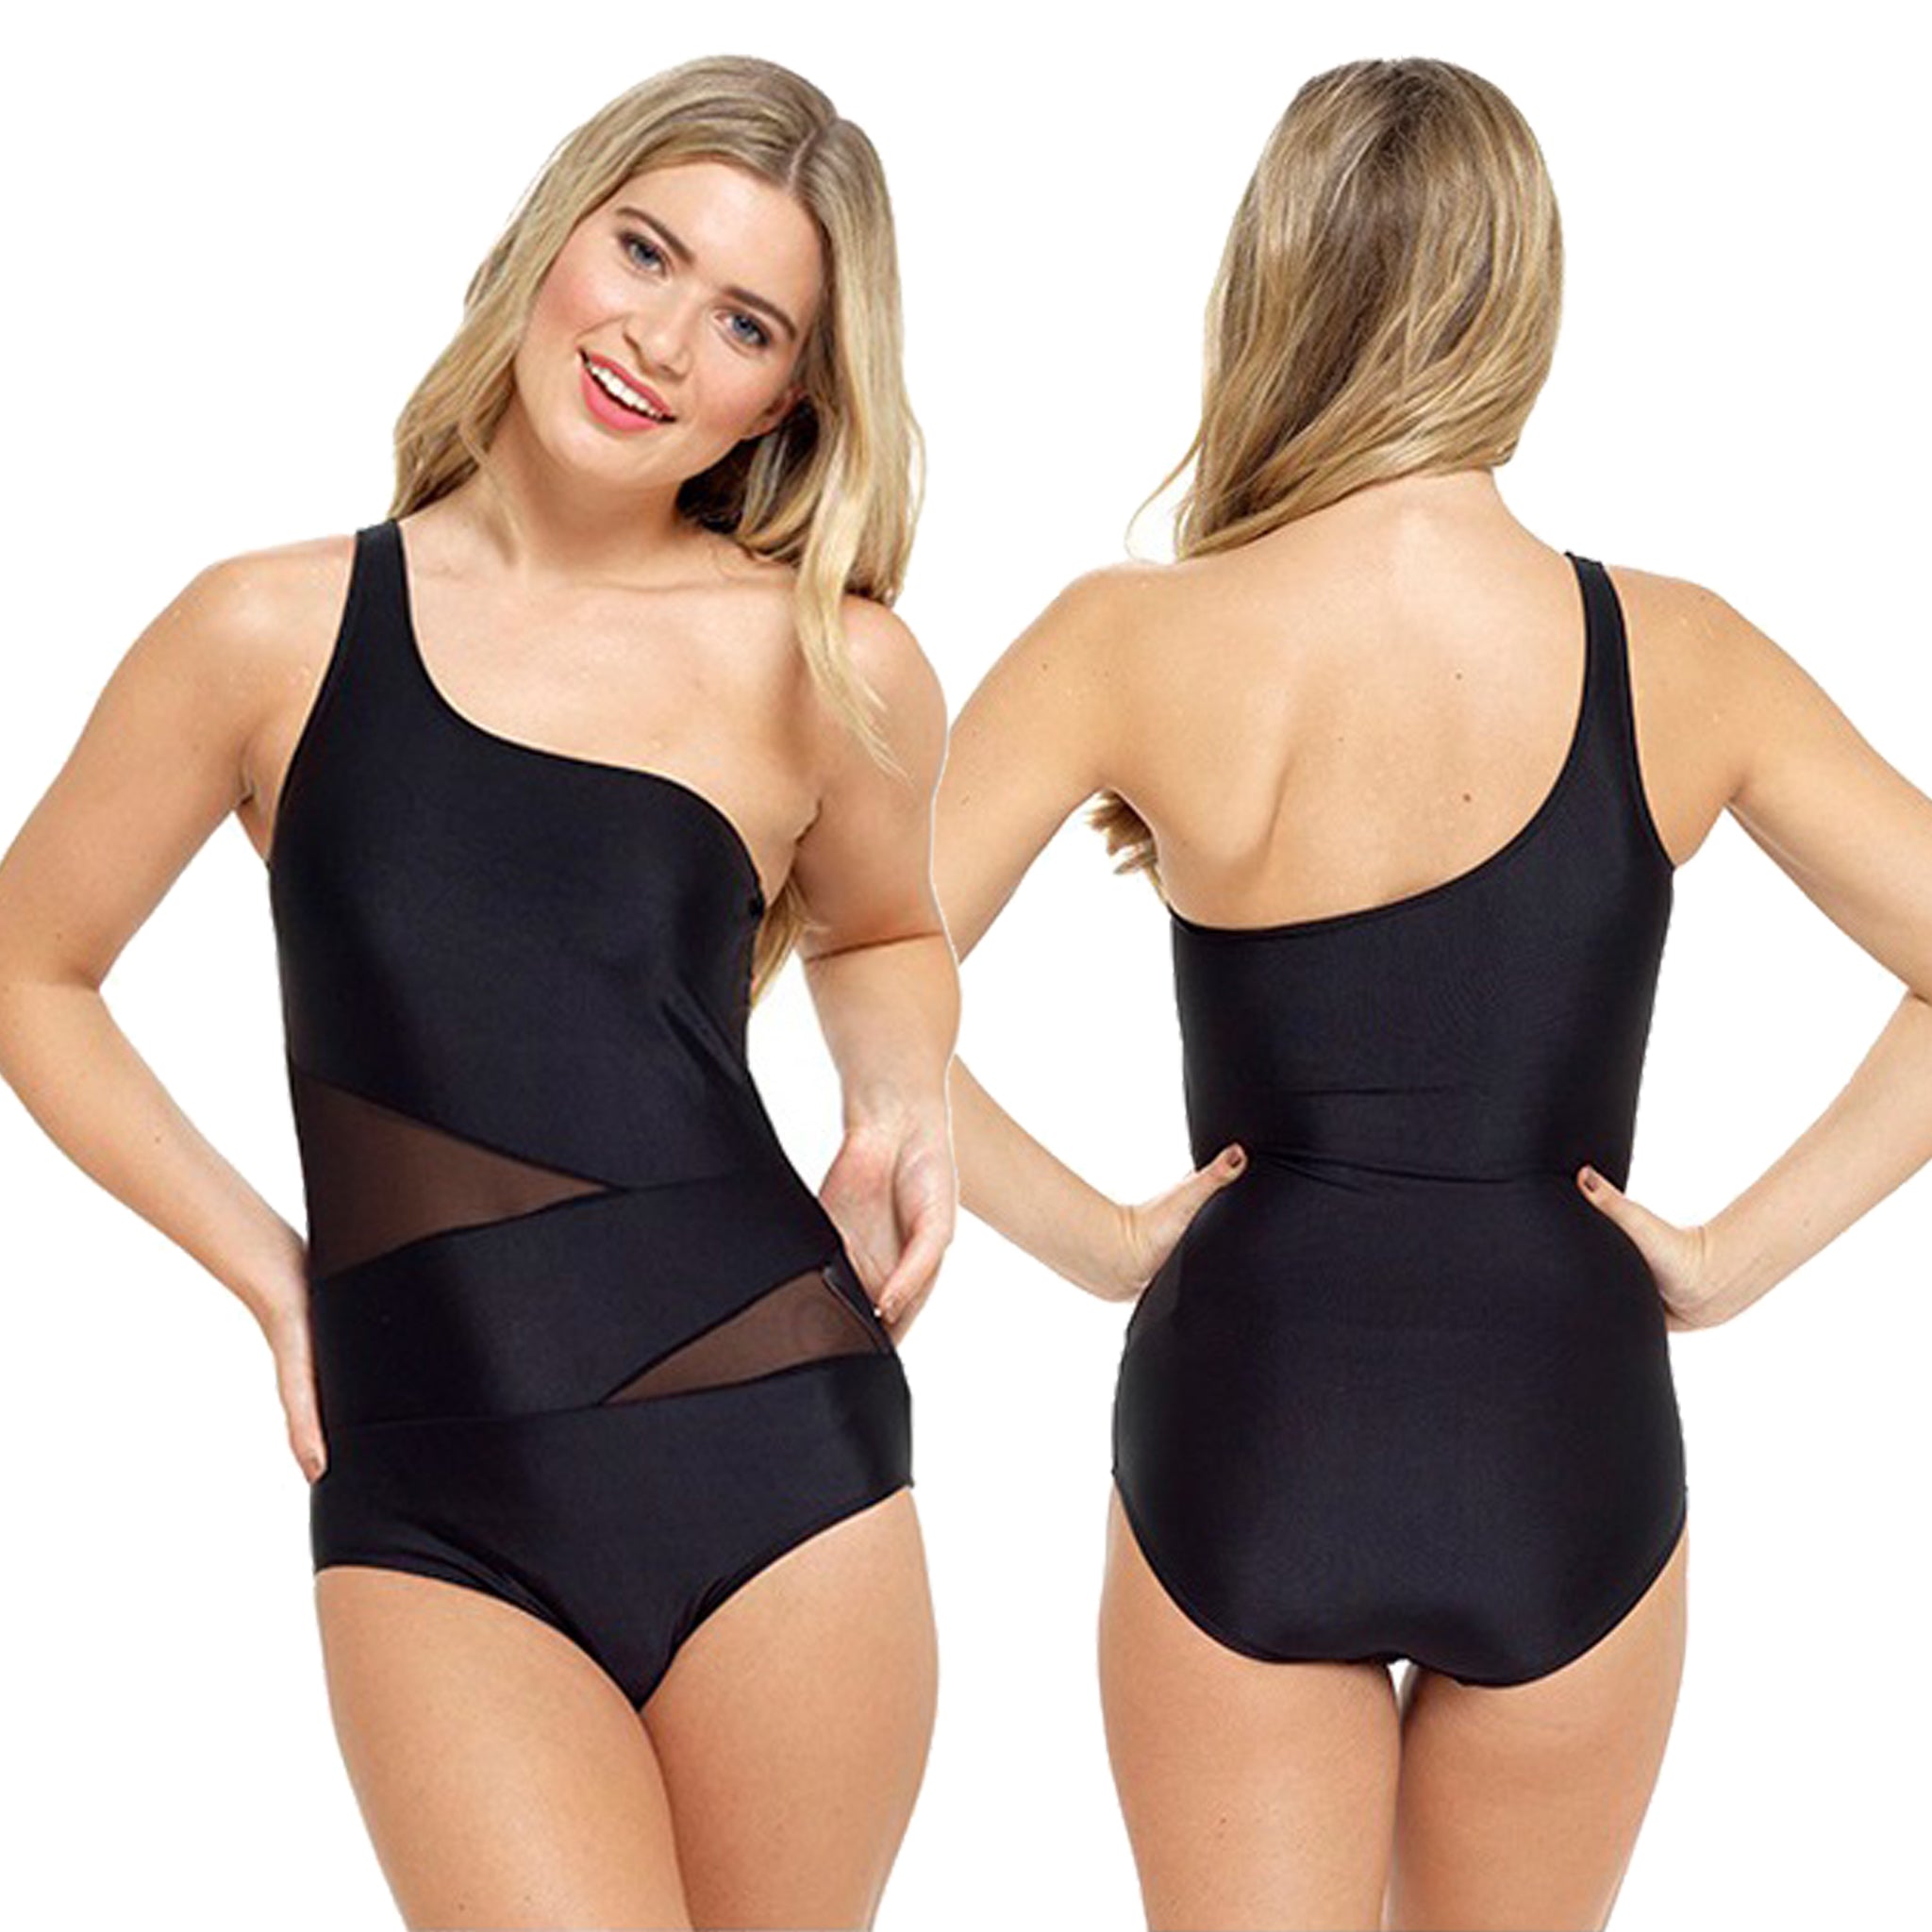 https://justforyouboutique.co.uk/cdn/shop/files/ladies-swimsuit-one-piece-swimming-costume-black-cut-away-mesh-size-10-12-14-16-just-for-you-boutique.jpg?v=1686418600